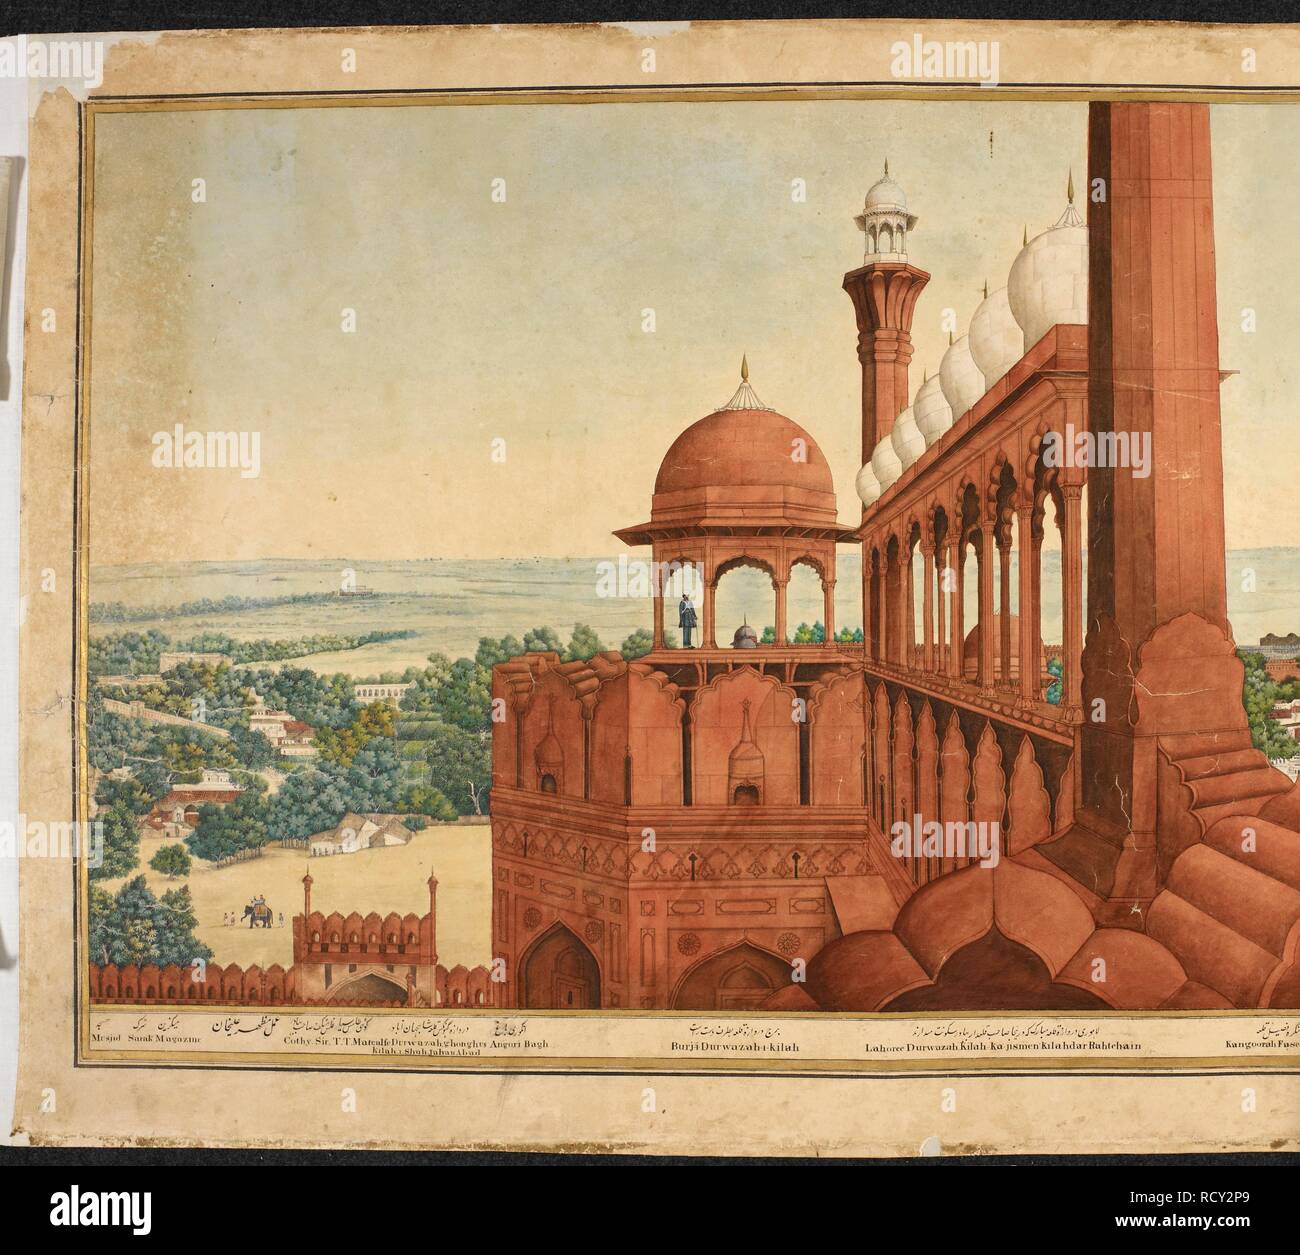 The Mogul Emperor's Palace. Part of a panorama of Delhi. A panorama of Delhi. 25th November 1846. A panorama of Delhi taken through almost 360Â° from the top of the Lahore Gate of the Red Fort, Delhi. Water-colour and body-colour with gold; 665 by 4908 mm (530 by 4828 mm within frame) on five sheets of paper, glued together to form a scroll. Source: Add.Or.4126. Language: Persian, English, Urdu. Author: Mazhar â€˜Ali Khan. Stock Photo